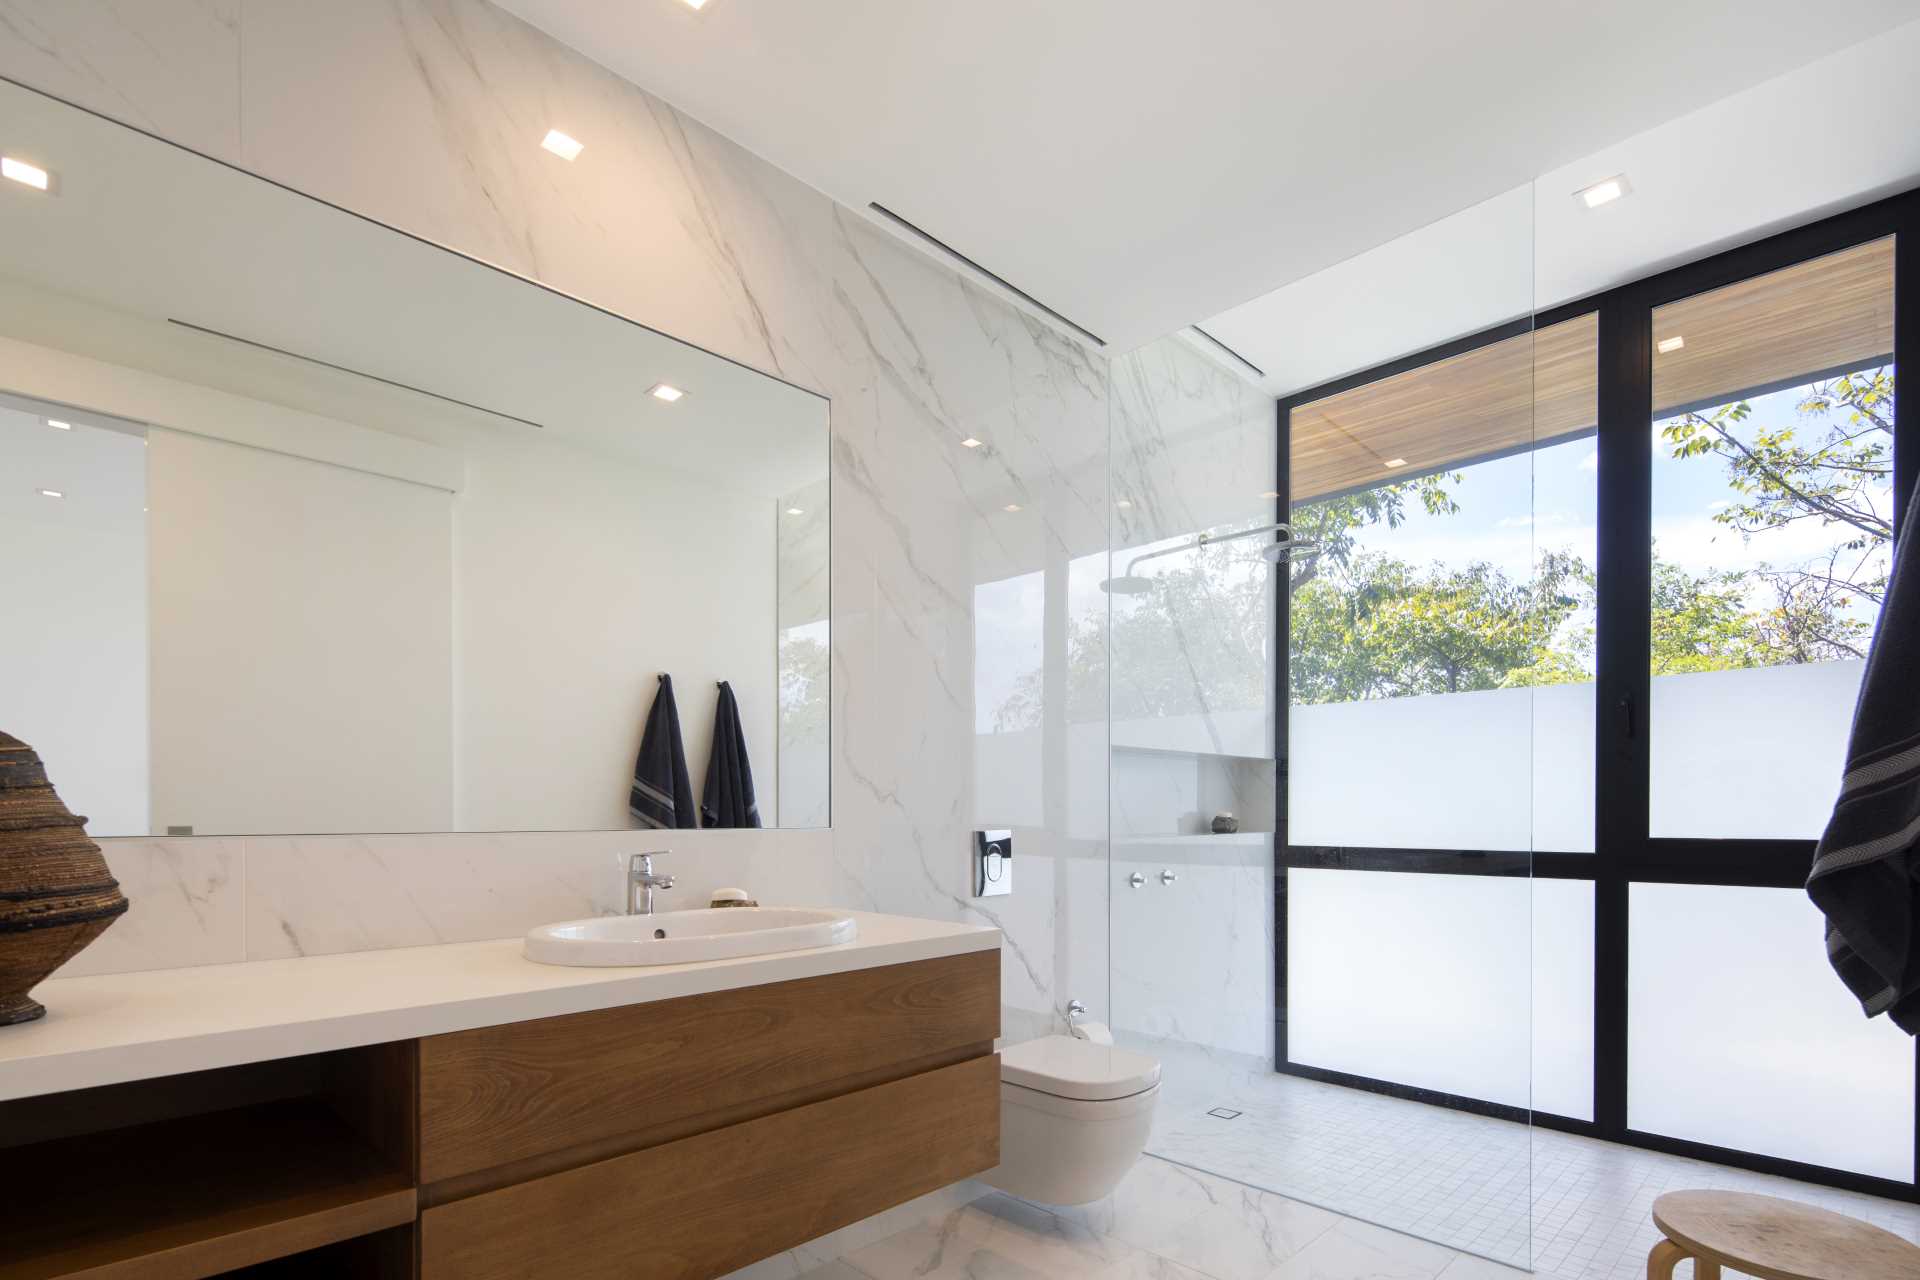 A contemporary bathroom design with a material color palette of wood, light colored tiles, white countertops, and glass.